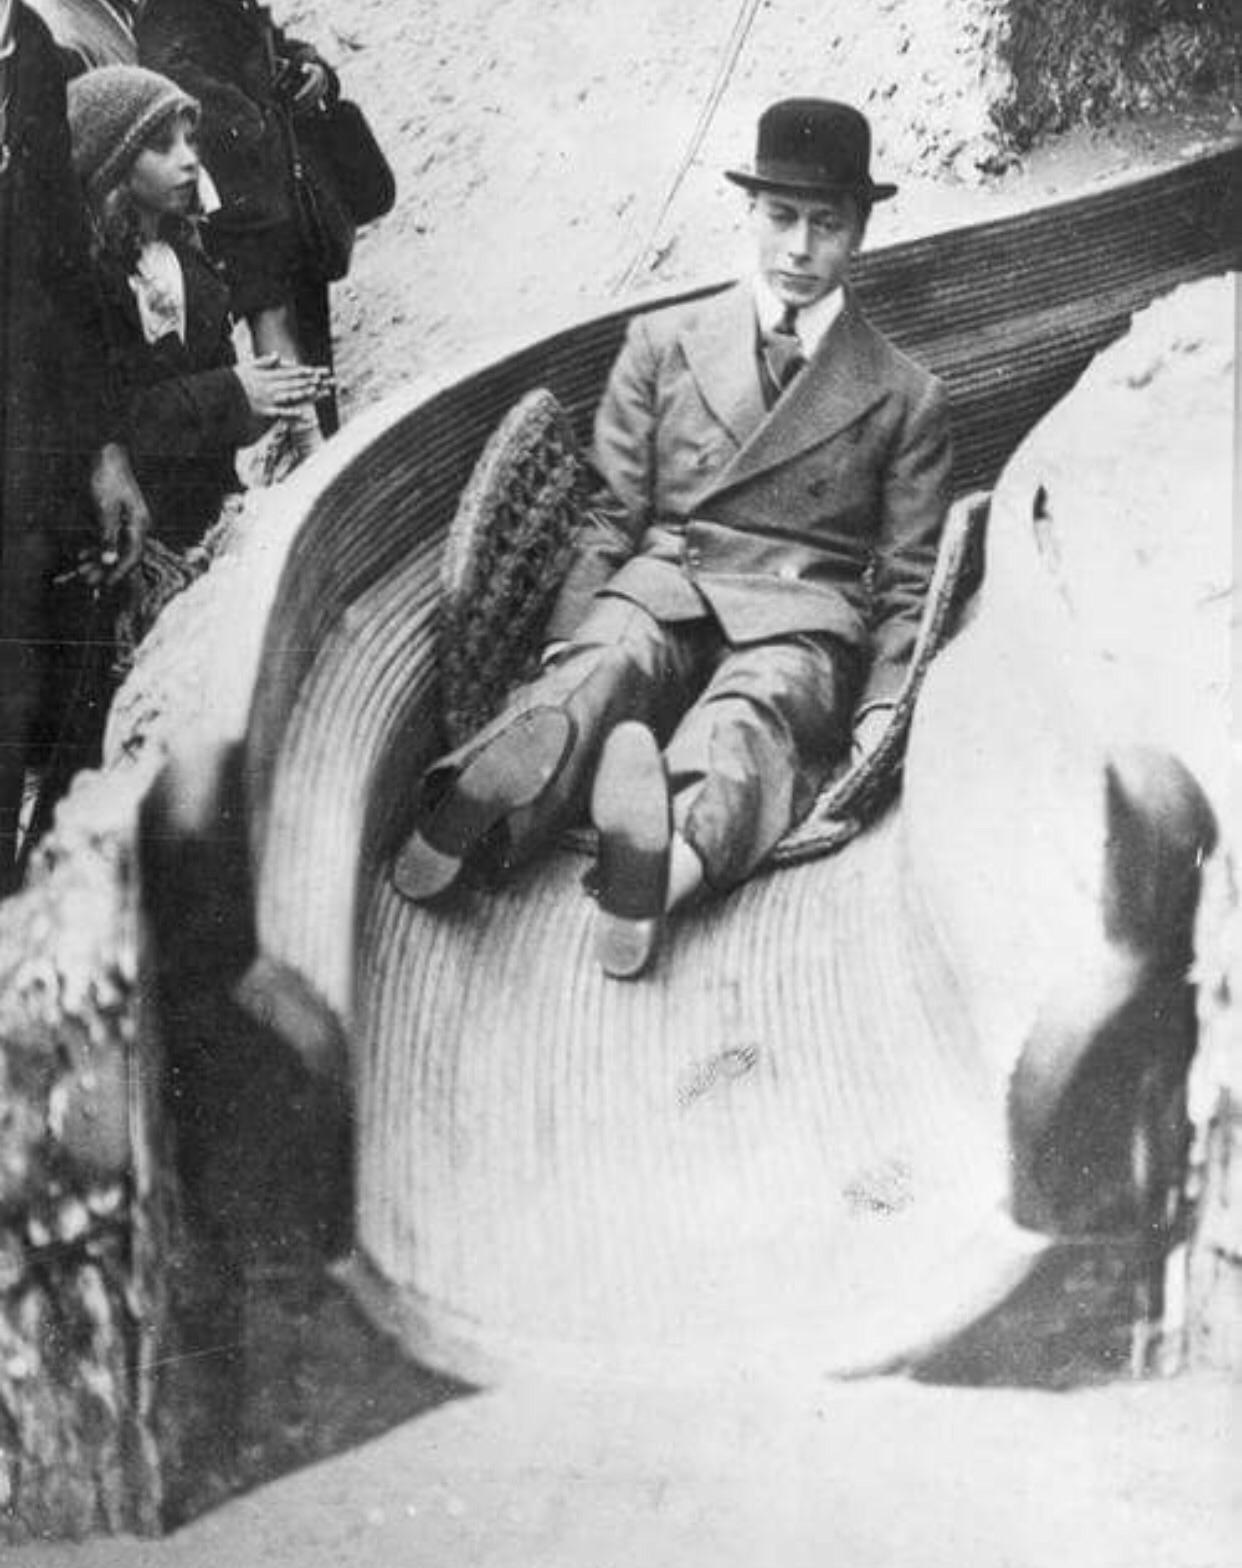 King George VI bursting with excitement on a theme park ride - 1930s.jpg